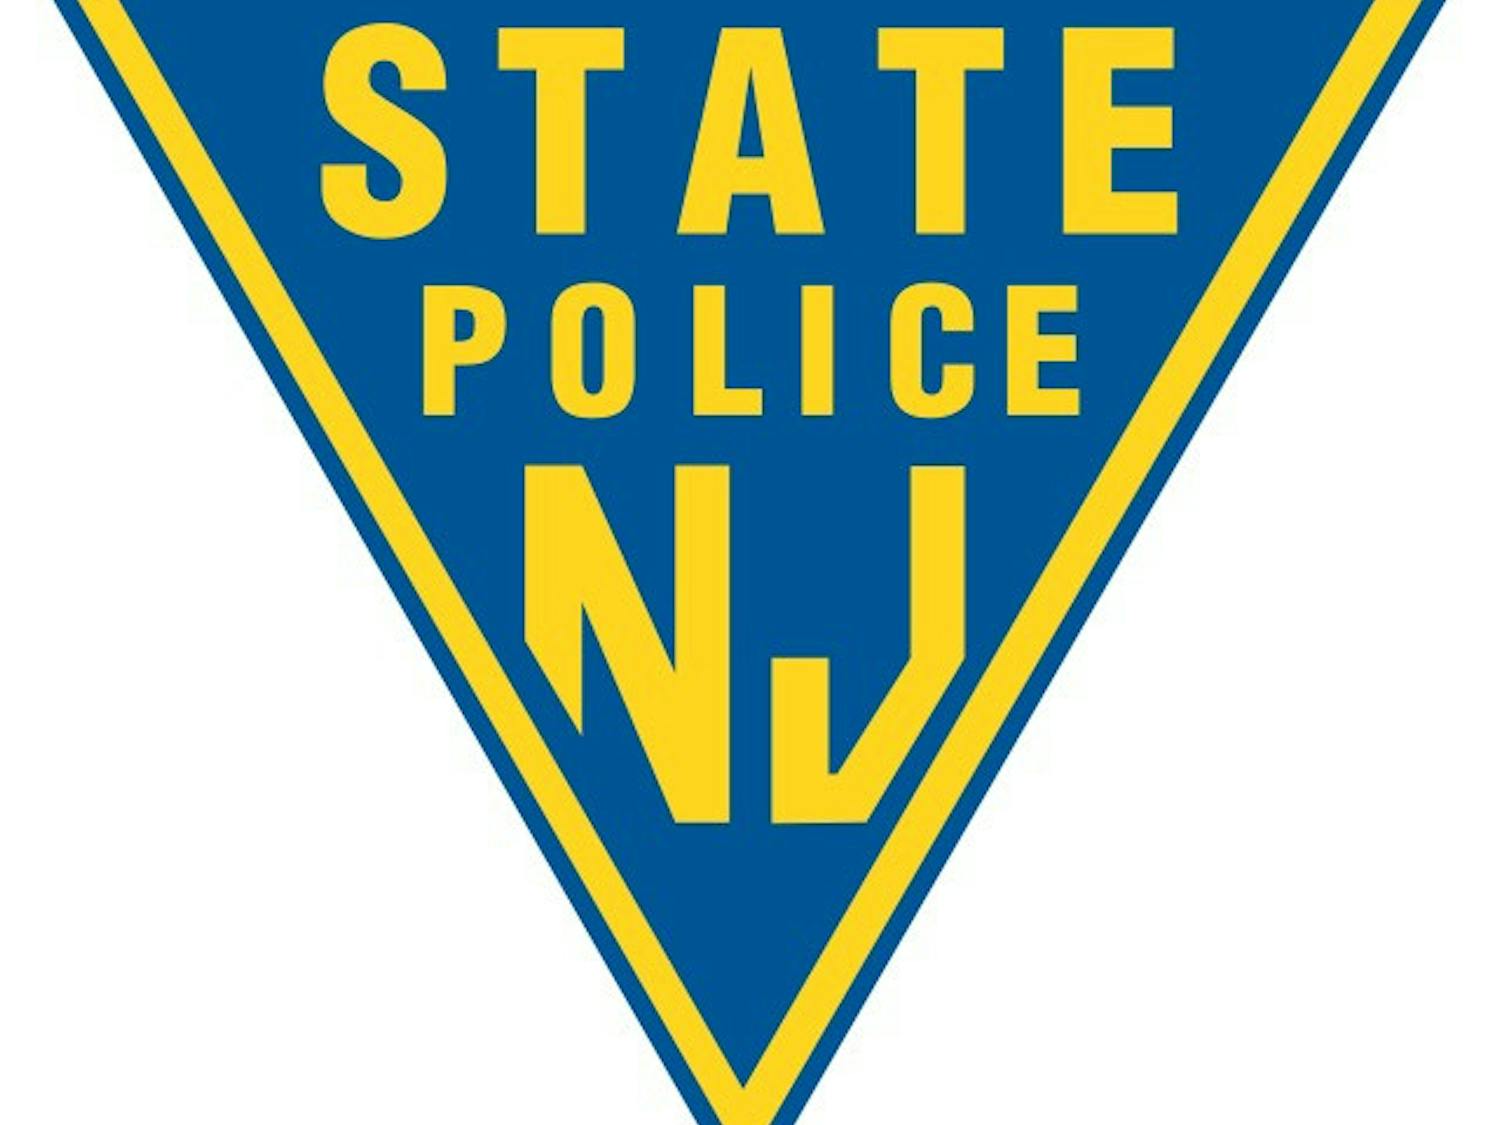 (Photo courtesy of Wikimedia Commons / New Jersey State Police, 2000)